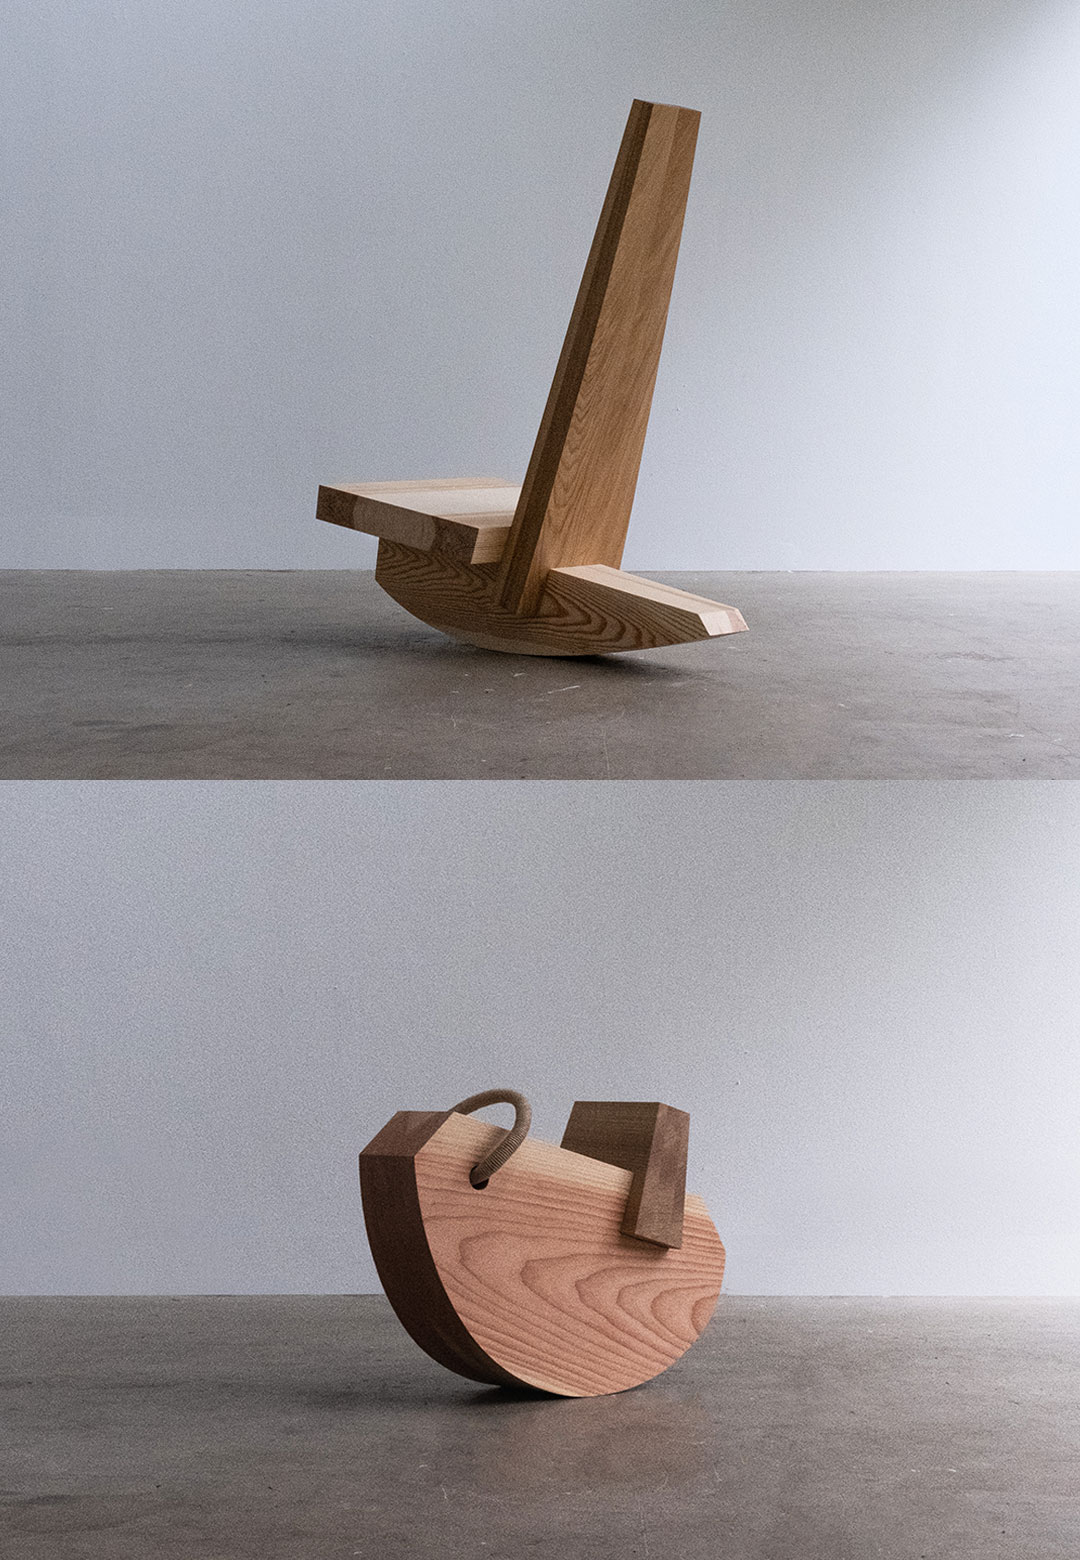 Christian+Jade’s ‘Weight of Wood’ explores the value of wood in our material lives